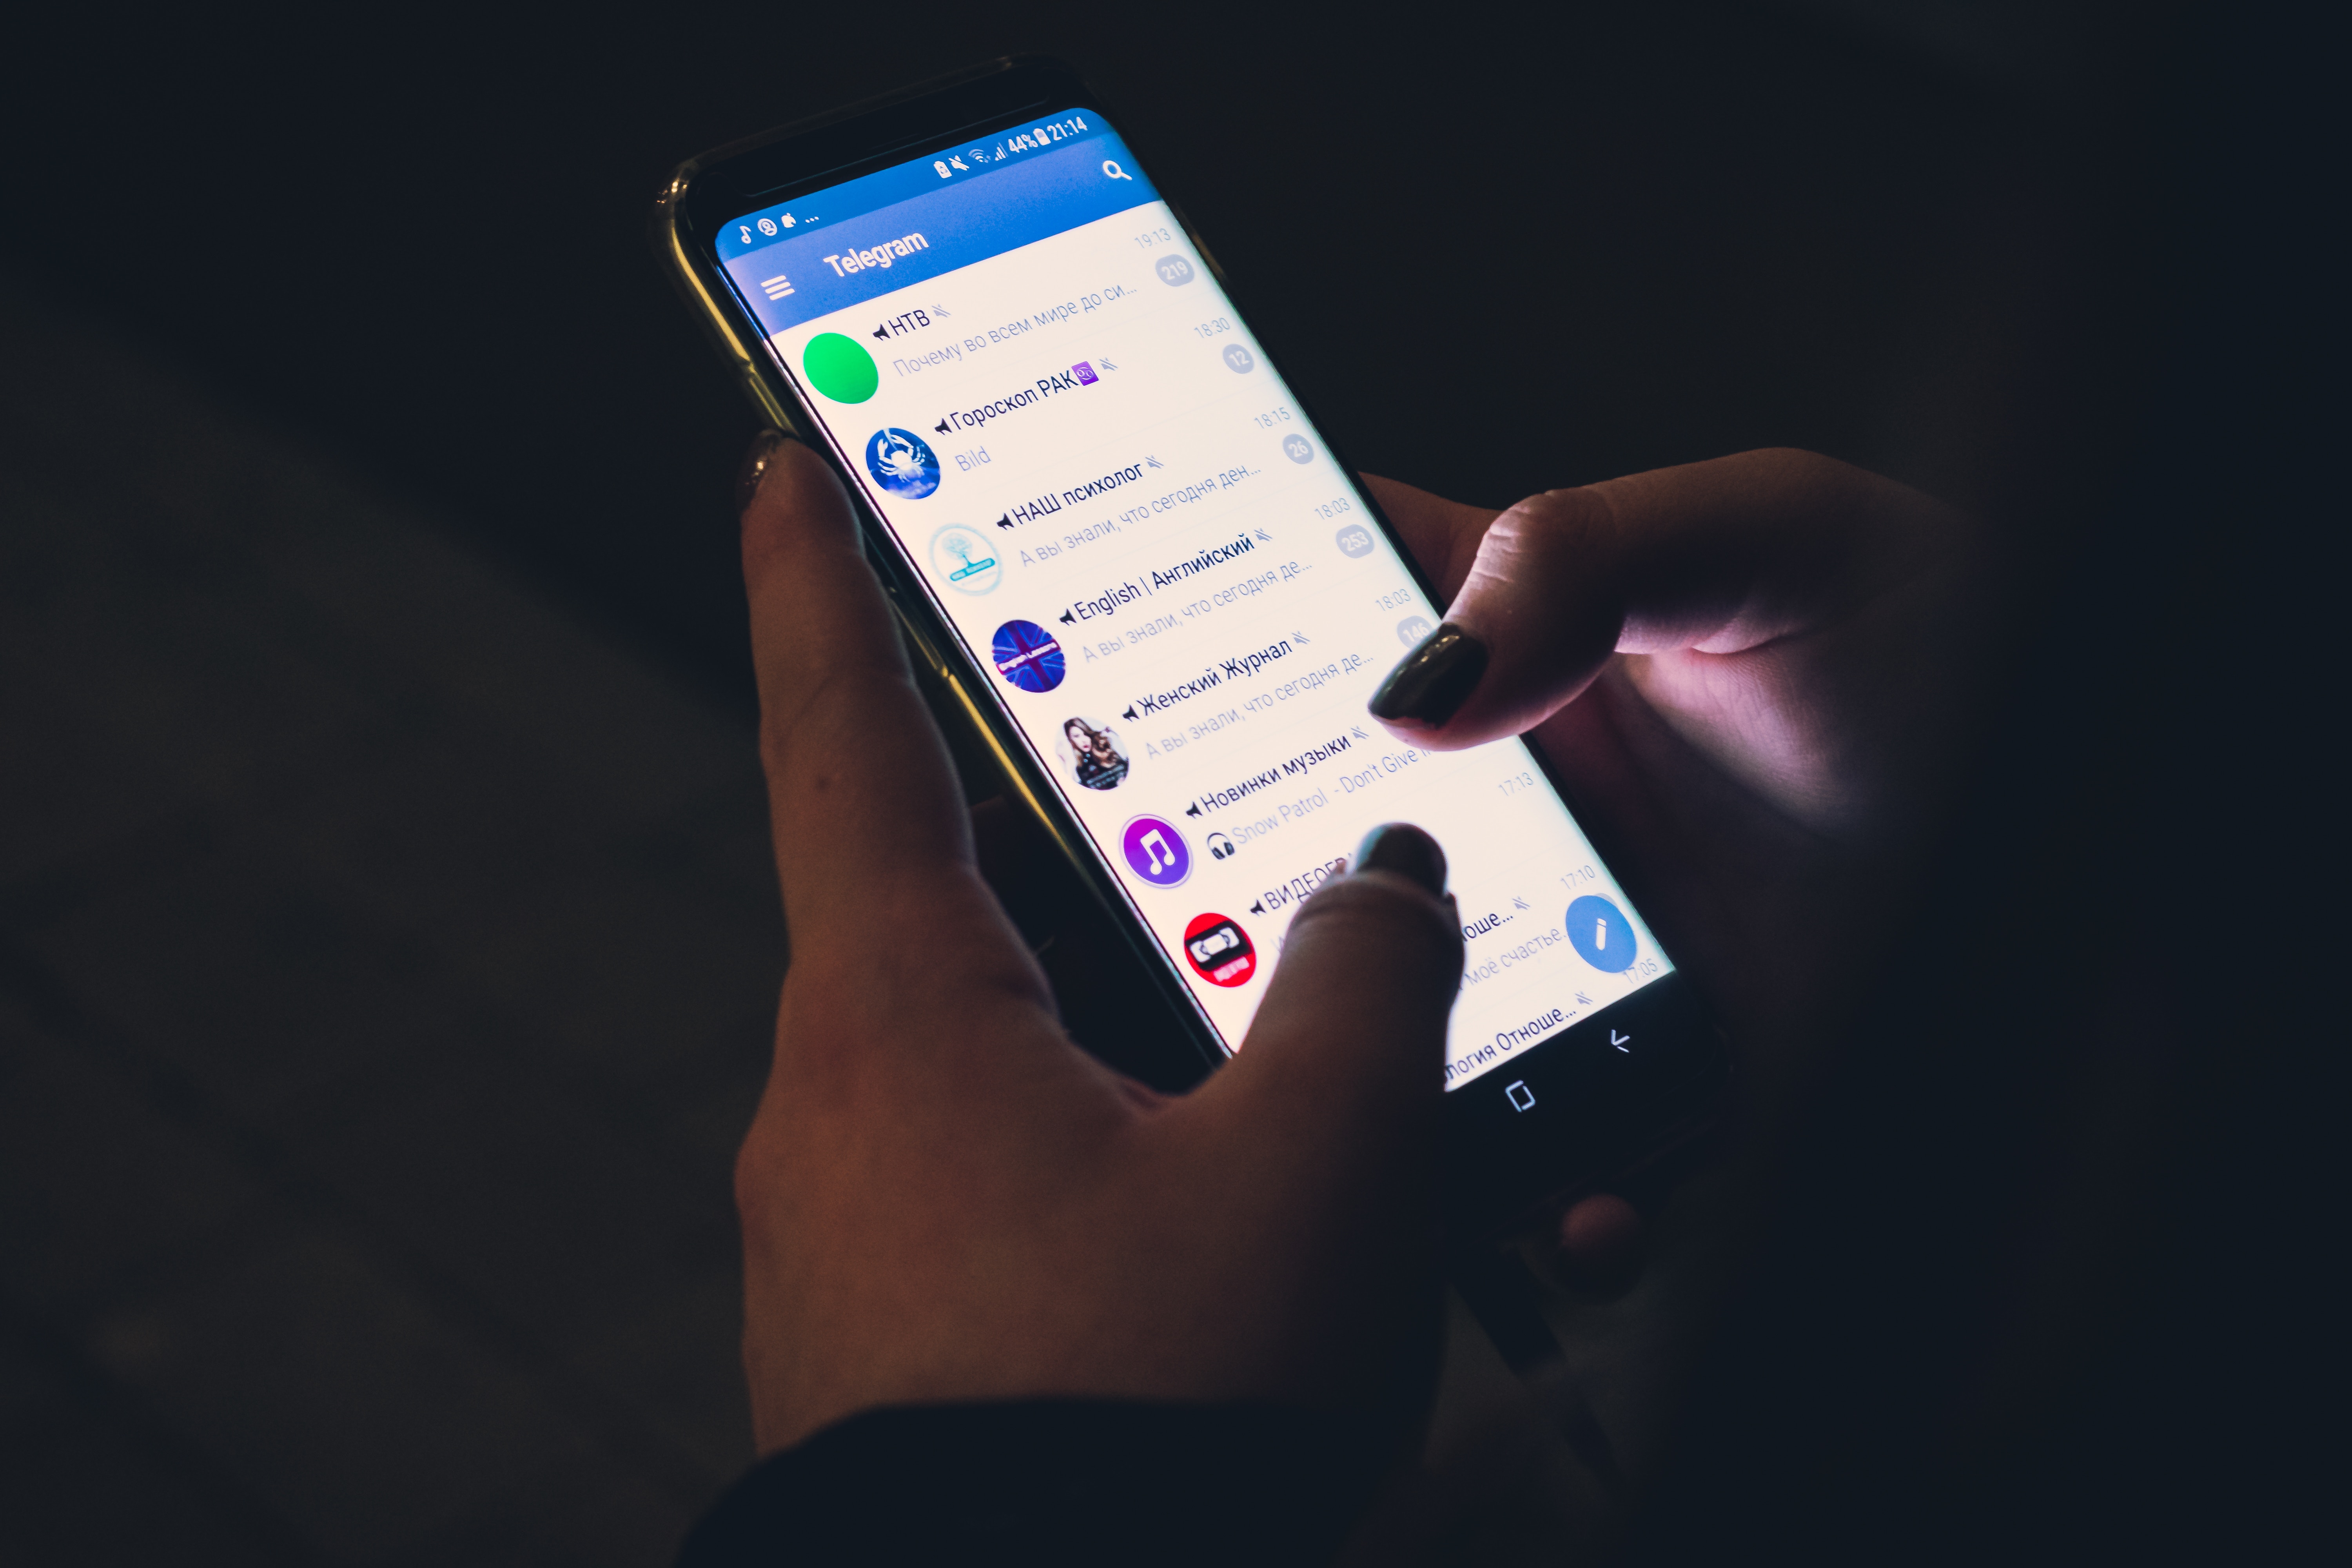 A person pictured using the Telegram application. (Photo by Christian Wiediger on Unsplash)